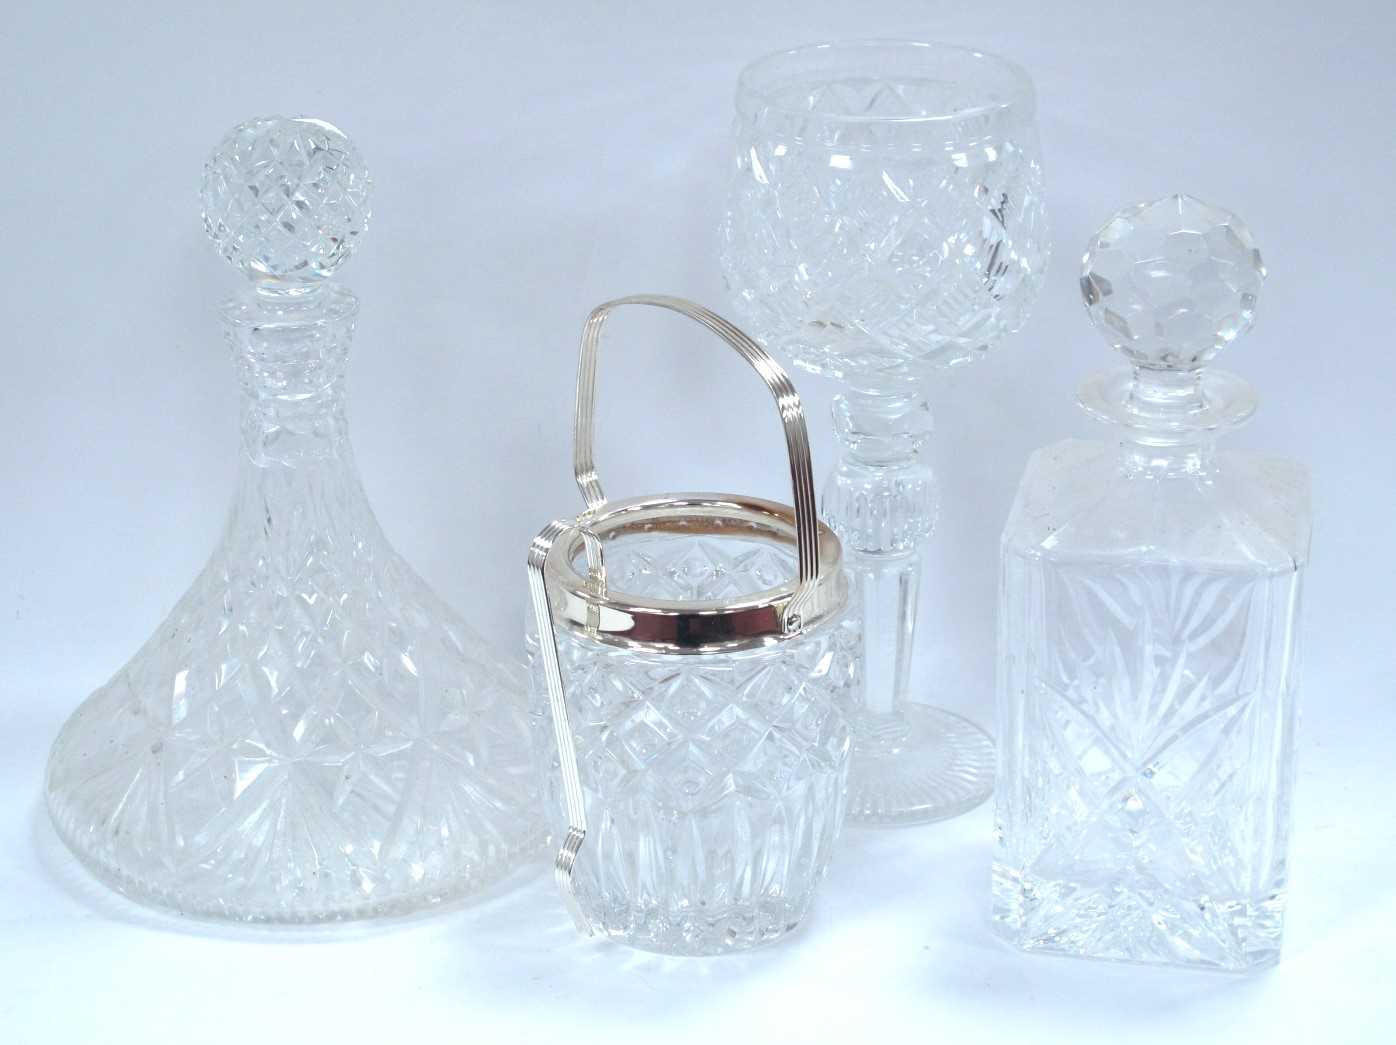 Glassware to include Royale County hand cut glass decanter, ships decanter, large goblet and ice